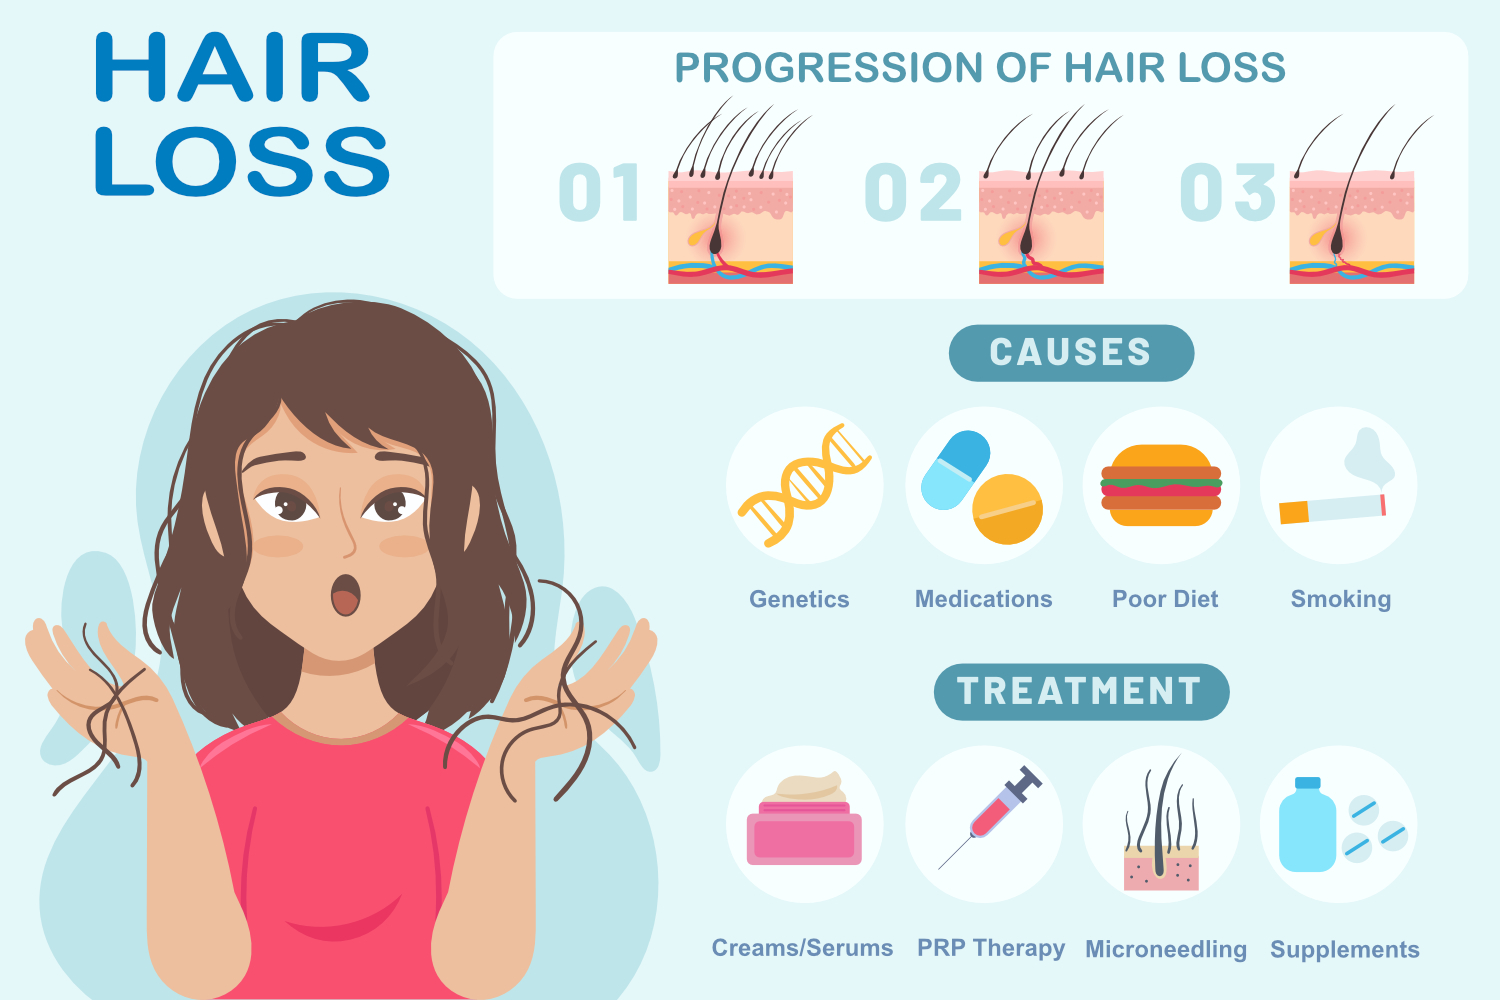 What factors contribute to hair loss? There are numerous causes of hair loss. What is causing your hair loss can influence whether or not your hair: Erupts gradually or suddenly Thins Can regrow on its own; nevertheless, regeneration requires treatment. Immediate attention is required to prevent irreversible hair loss. Hair loss causes Hair loss that is inherited This type of hair loss affects both men and women and is the most frequent cause of hair loss worldwide. Male pattern hair loss is a term used to describe hair loss in men. Female pattern hair loss affects women. Androgenic alopecia is the medical name for hair loss that occurs in either males or women. Whatever term you pick, it means you've inherited genes that cause your hair follicles (where each hair grows) to shrink and die. Shrinking can occur as early as your adolescence, but it is more common later in life. The earliest visible sign of hereditary hair loss in women is usually overall thinning or a widening portion. A receding hairline or bald spot at the top of a man's head is generally the first indicator of hereditary hair loss. Is it possible to re-grow? Yes, therapy can help to prevent or slow down hair loss. It may also aid with hair growth. The sooner treatment begins, the better it works. You will continue to lose hair if you do not get therapy. Hair loss that is inherited This type of hair loss affects both men and women and is the most frequent cause of hair loss worldwide. Male pattern hair loss is a term used to describe hair loss in men. Female pattern hair loss affects women. Age Most people notice hair loss as they become older because hair growth slows. Hair follicles eventually stop producing hair, causing the hair on our scalp to become thin. Hair begins to lose color as well. The hairline of a lady gradually recedes. Is it possible to re-grow? When detected early, therapy can help some people regrow their hair. Age Most people notice hair loss as they become older because hair growth slows. older people could sit with dogs Alopecia areata (hair loss) Alopecia areata is a disorder that occurs when the body's immune system destroys hair follicles (the structures that maintain hair in place), resulting in hair loss. Hair loss can occur anywhere on the body, including the scalp, the nose, and the ears. Some may have lash or brow loss. Is it possible to re-grow? Yes. If your hair does not recover on its own, therapy may stimulate regrowth. Cancer therapy If you get chemotherapy or radiation treatment to your head or neck, you may lose all (or most) of your hair within a few weeks. Is it possible to re-grow? Hair normally begins to regenerate within months of completing head or neck chemotherapy or radiation treatments. Dermatologists can prescribe medicines to help hair regrow faster. Is it avoidable? Wearing a cooling hat before, during, and after each chemotherapy session may aid in hair loss prevention. Childbirth, illness, or other sources of stress You may notice a lot more hairs in your brush or on your pillow a few months after giving birth, recovering from an illness, or having surgery. This might also occur after a tough period in your life. Is it possible to re-grow? When the stress is relieved, your body will readjust and the excessive shedding will cease. When shedding stops, most people's hair returns to normal fullness in 6 to 9 months. Hair maintenance If you color, perm, or relax your hair, you may be causing damage to it. This injury might cause hair loss over time. Is it possible to re-grow? You can alter your hair care routine to avoid hair loss. Hair cannot develop from a hair follicle that has been damaged. The presence of several damaged hair follicles results in permanent bald areas. Your hairstyle is pulling on your scalp. If you frequently wear your hair pulled back, the constant pulling can result in irreversible hair loss. Traction alopecia is the medical term for this illness. Is it possible to re-grow? No. You can avoid hair loss by making simple lifestyle adjustments. Your hairstyle is pulling on your scalp. If you frequently wear your hair pulled back, the constant pulling can lead to permanent hair loss. Unbalanced hormones The polycystic ovarian syndrome is a common cause of this imbalance (PCOS). It causes cysts on a woman's ovaries, as well as other signs and symptoms such as hair loss. Stopping some birth control tablets can result in a temporary hormonal imbalance. Women who experience a hormonal imbalance may experience thinning (or hair loss) on their scalps. Is it possible to re-grow? Treatment may be beneficial. Unbalanced hormones The polycystic ovarian syndrome is a common cause of this imbalance (PCOS). It causes cysts on a woman's ovaries, as well as other signs and symptoms such as hair loss.